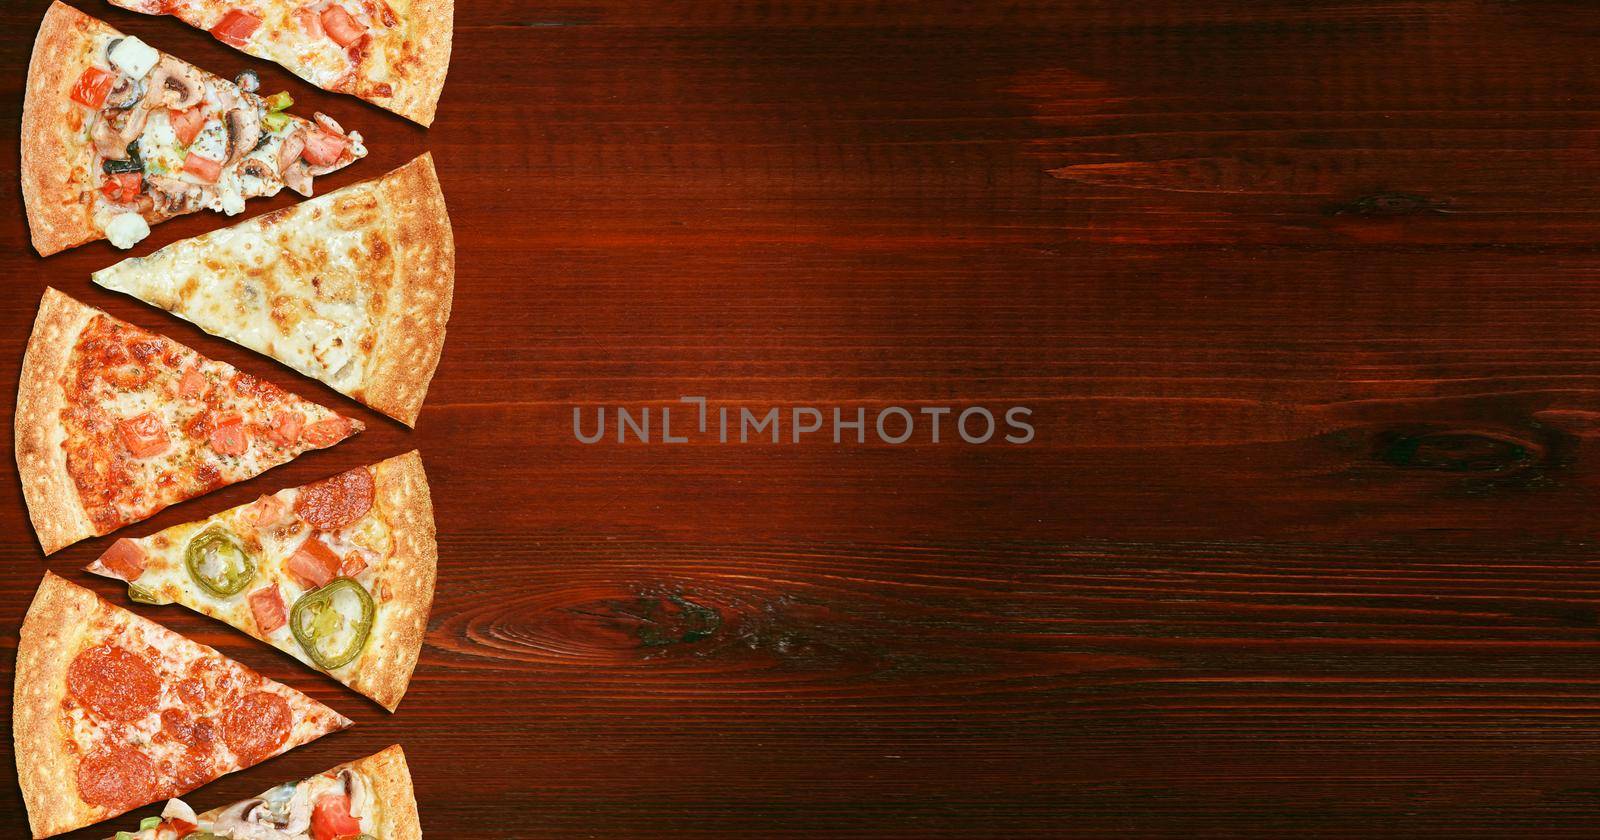 fresh raw cutlets for burger from beef. wooden background, rustic style. by vvmich